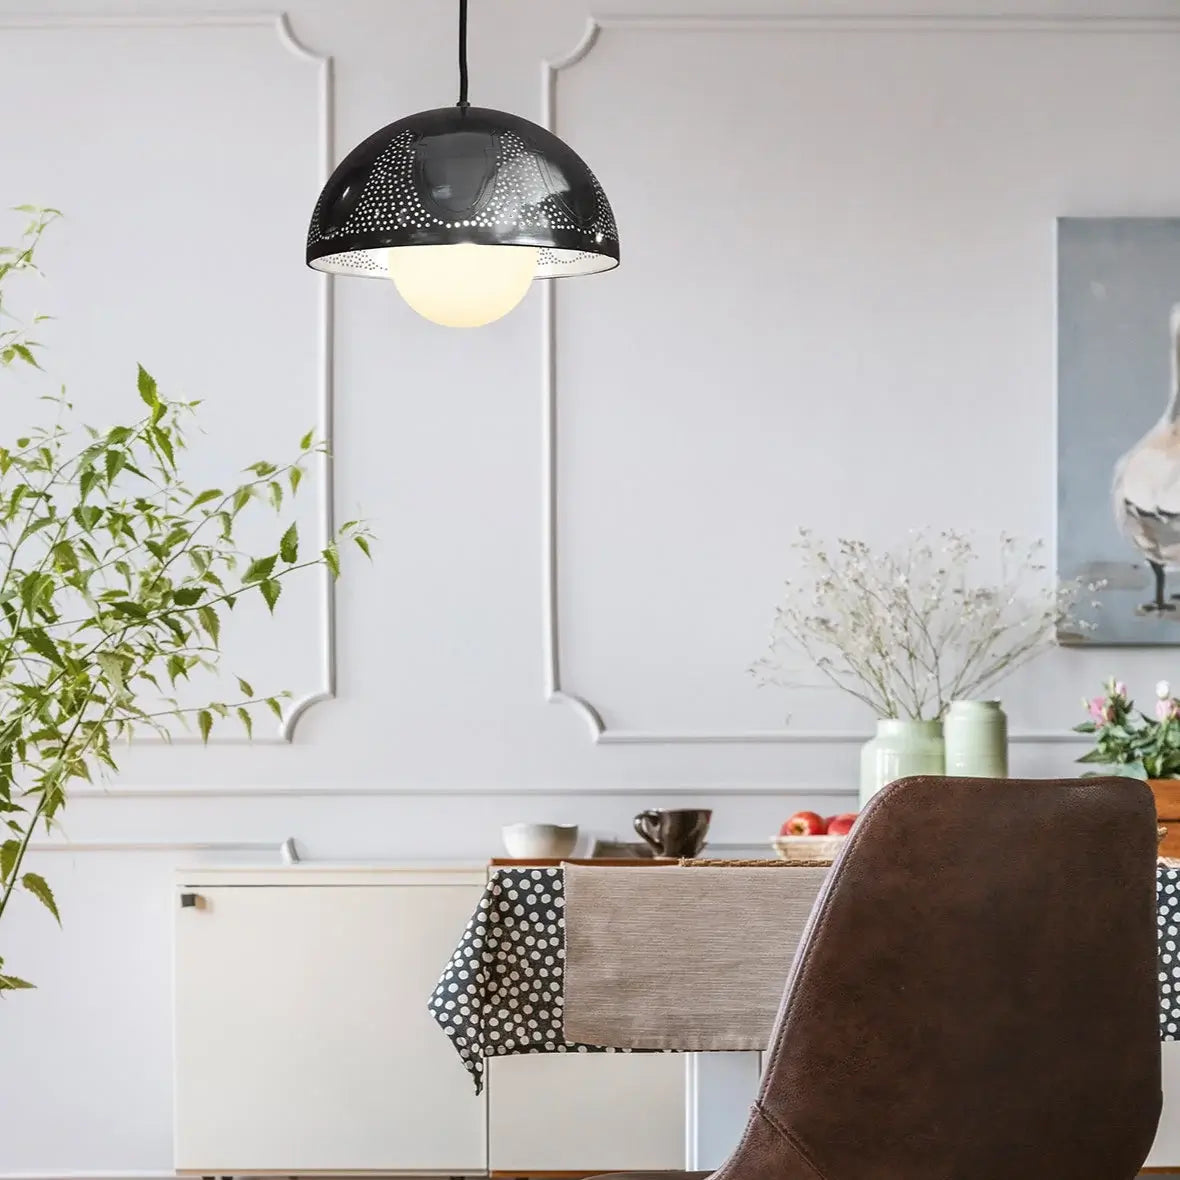 Dounia home Pendant light in black  made of Metal,  used as a dining room lighting, Model: Taj  bell